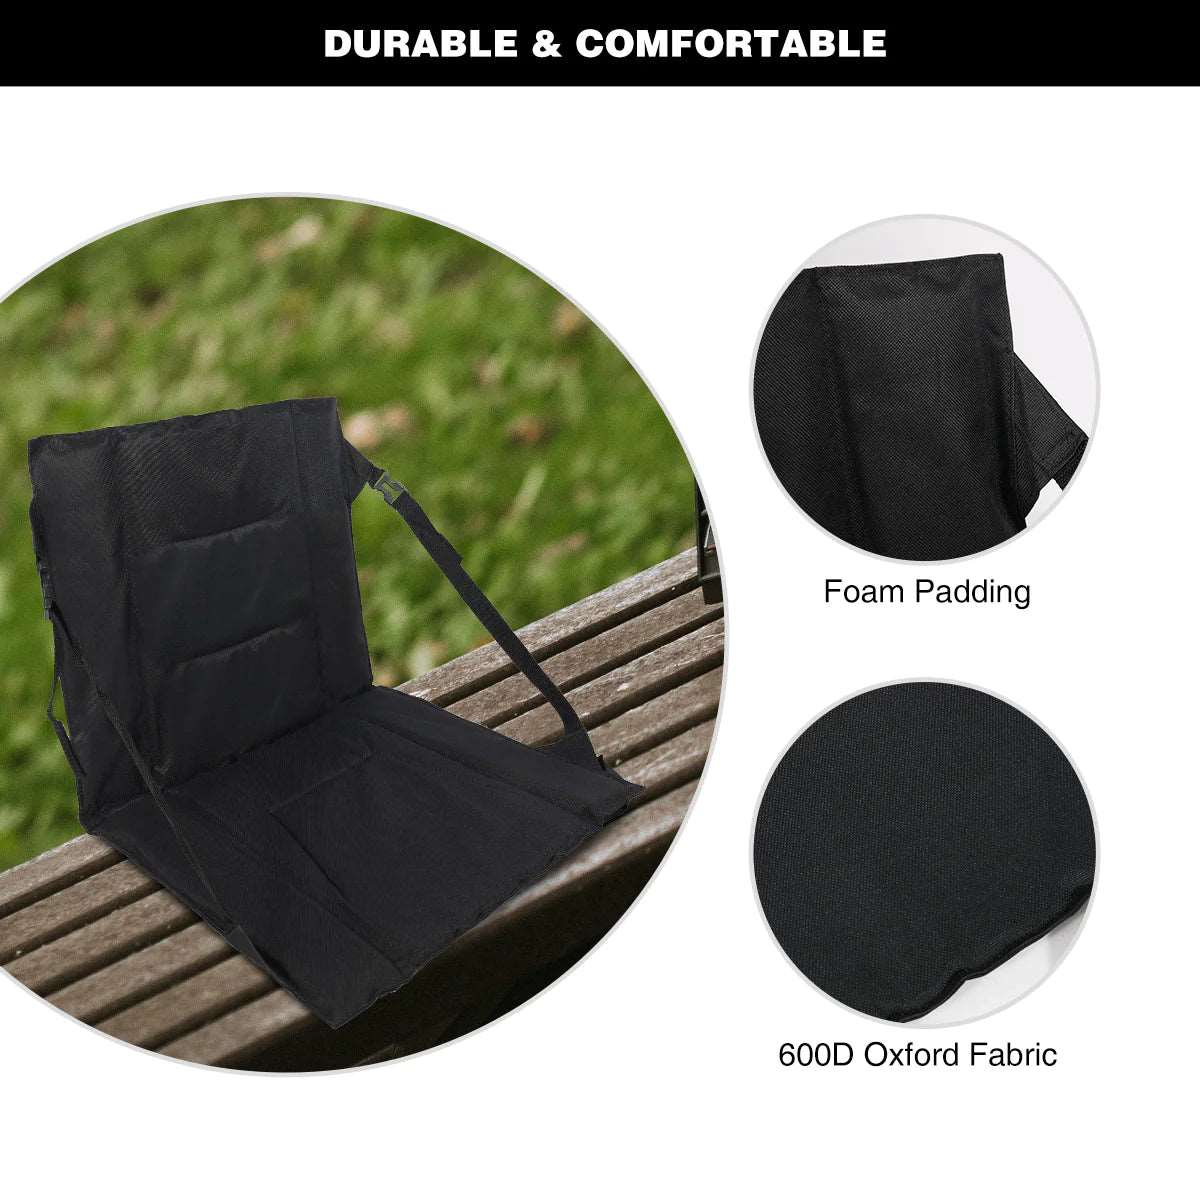 Camping Padded Floor Chair Portable Folding Waterproof Outdoor Fishing Seat Cushion Stadium SEATS for Bleachers Stadium Chair with Back Support, Men's